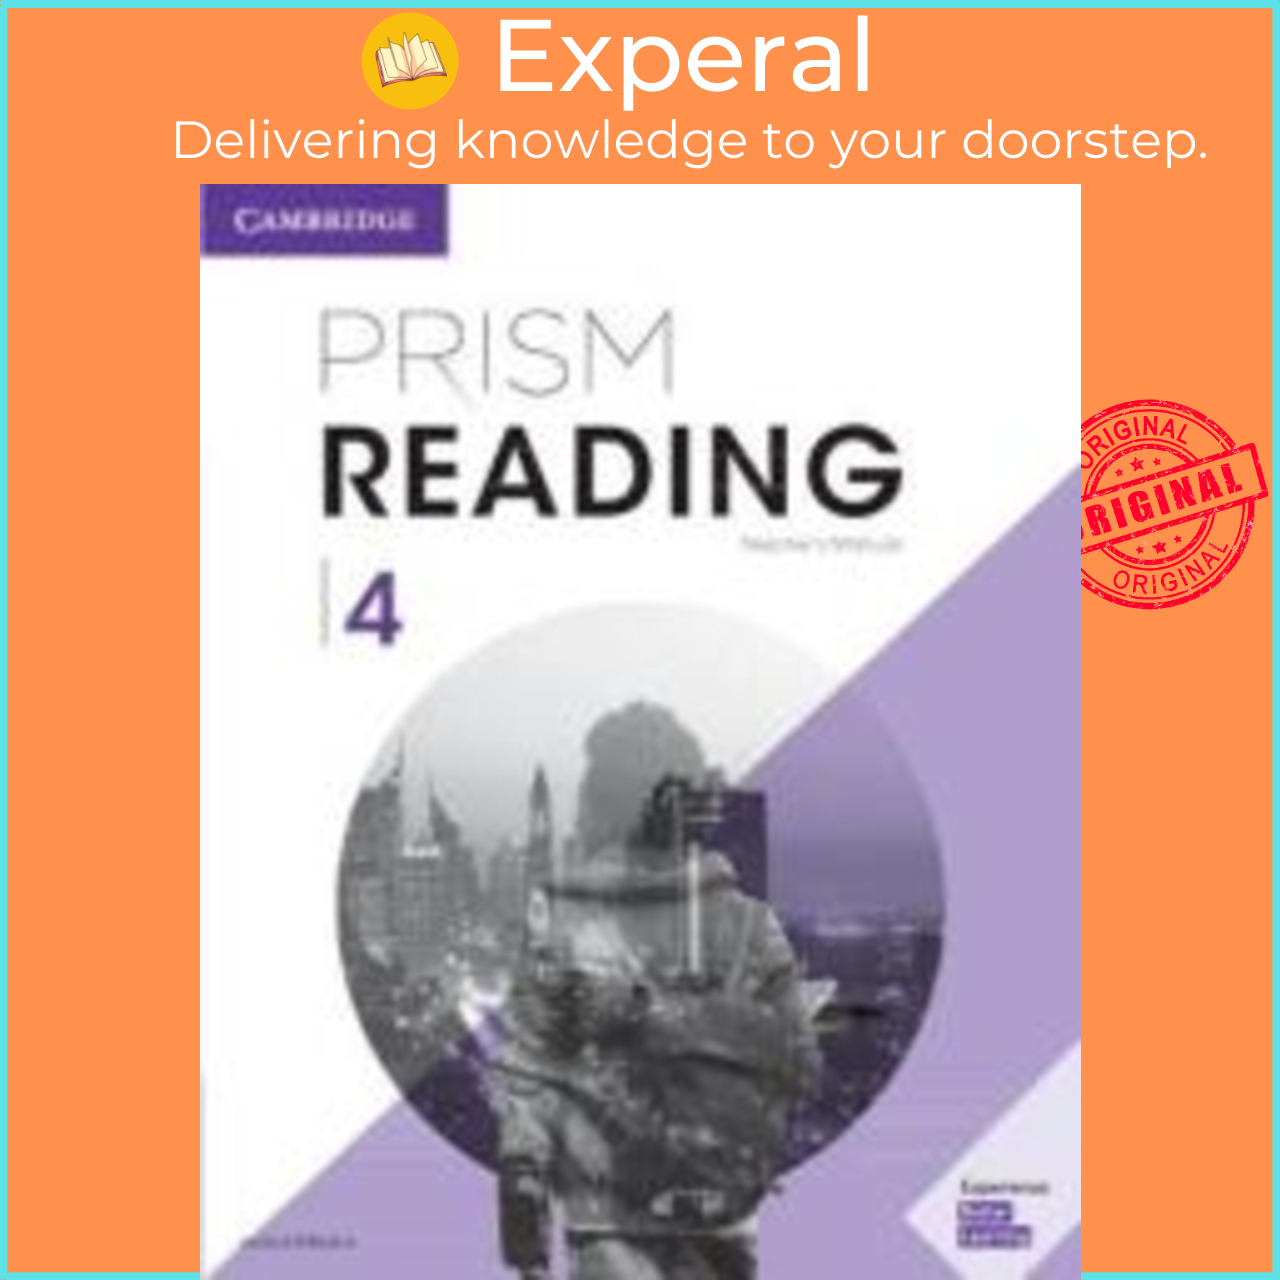 Williams　Jessica　(UK　Level　Prism　Lazada　Reading　Teacher's　edition,　paperback)　Manual　by　Singapore